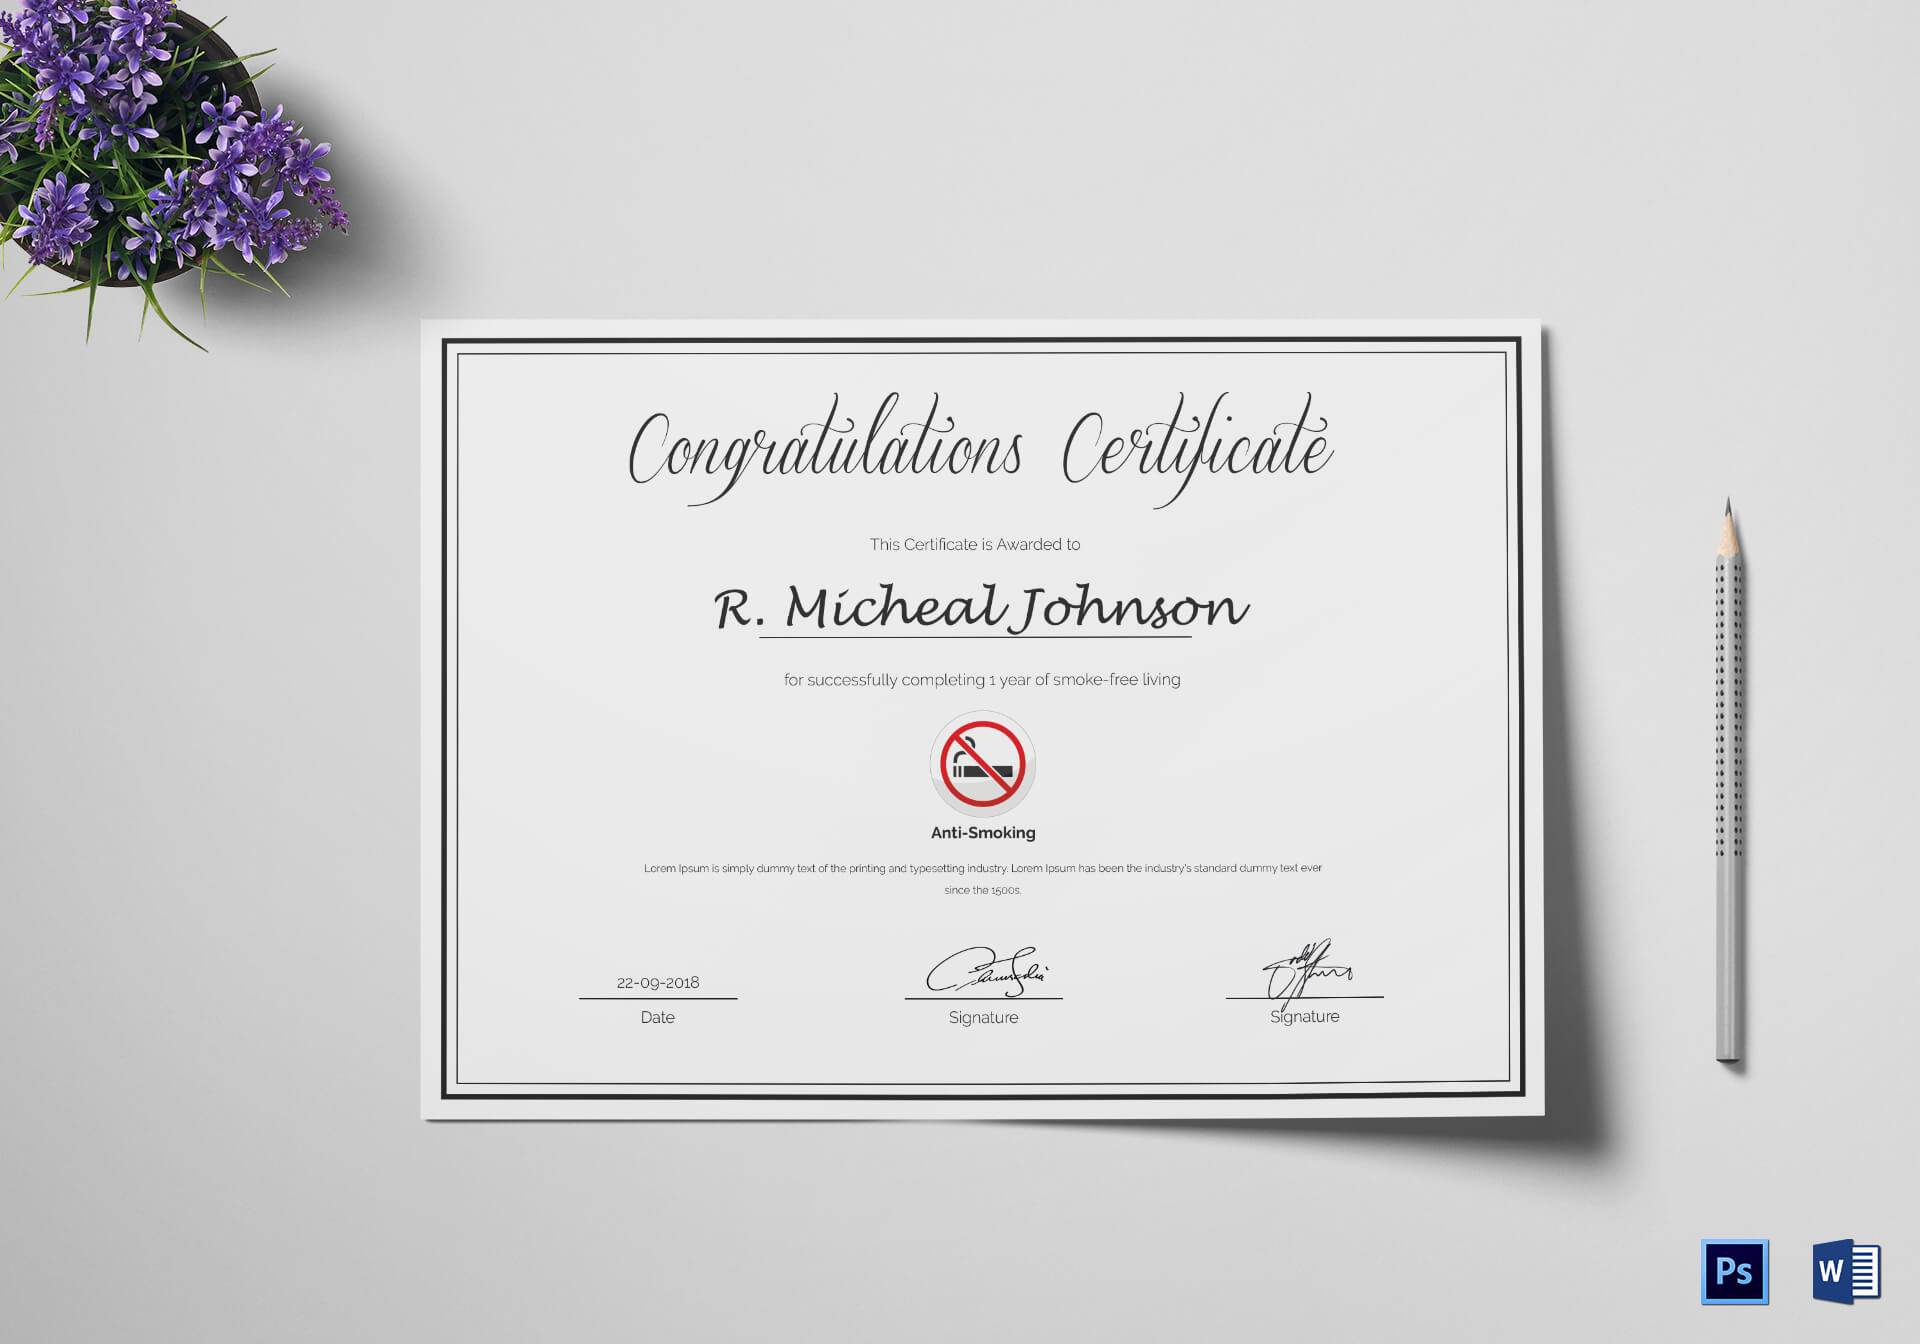 Certificate Of Congratulations For Quitting Smoking Template For Congratulations Certificate Word Template